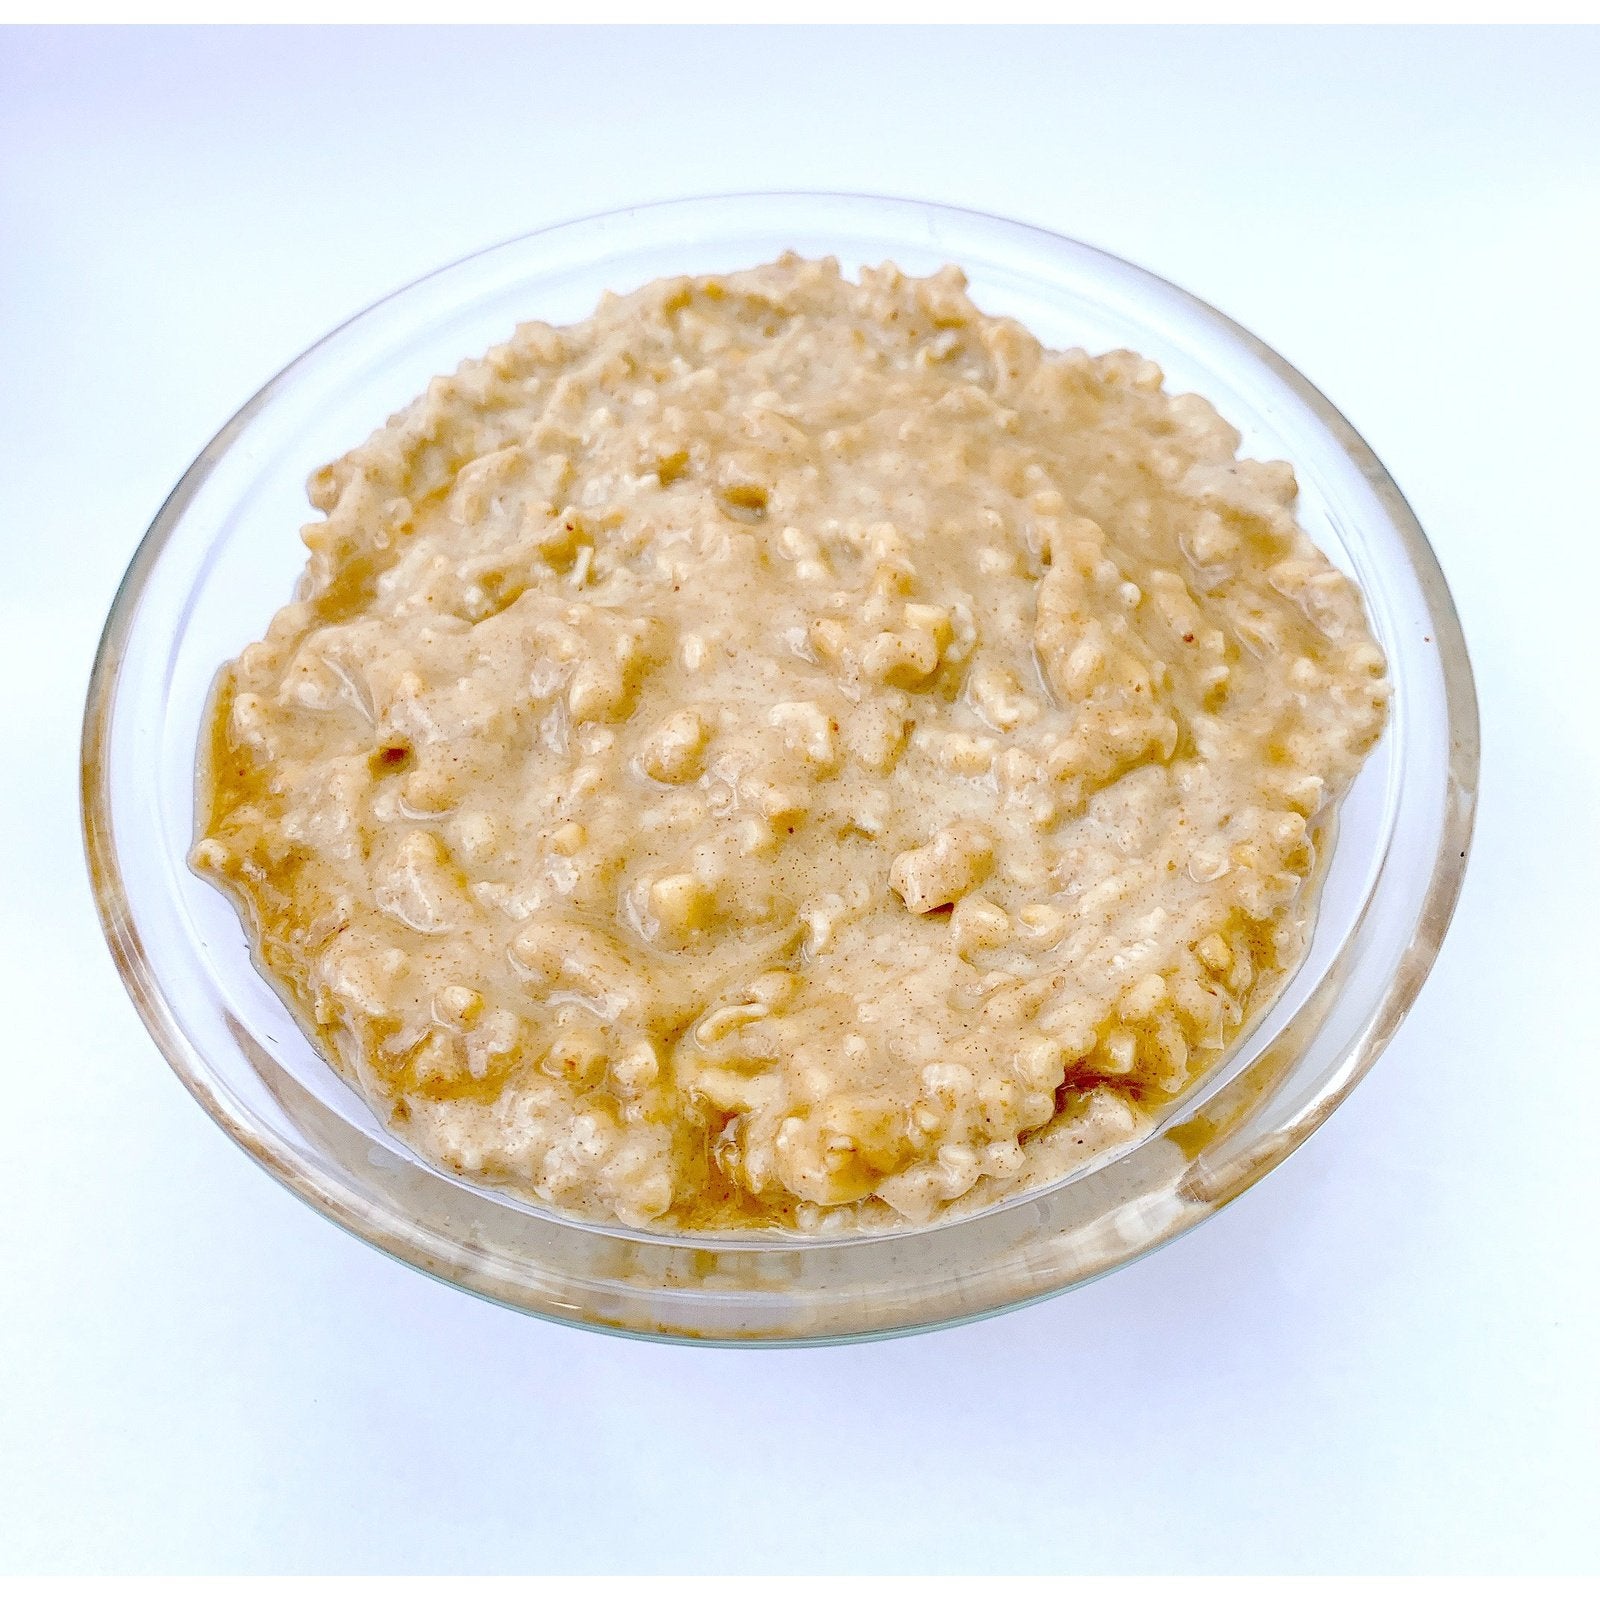 SpaJuiceBar raw oatmeal is made with steal cut oats blended in a cashew date custard sauce.